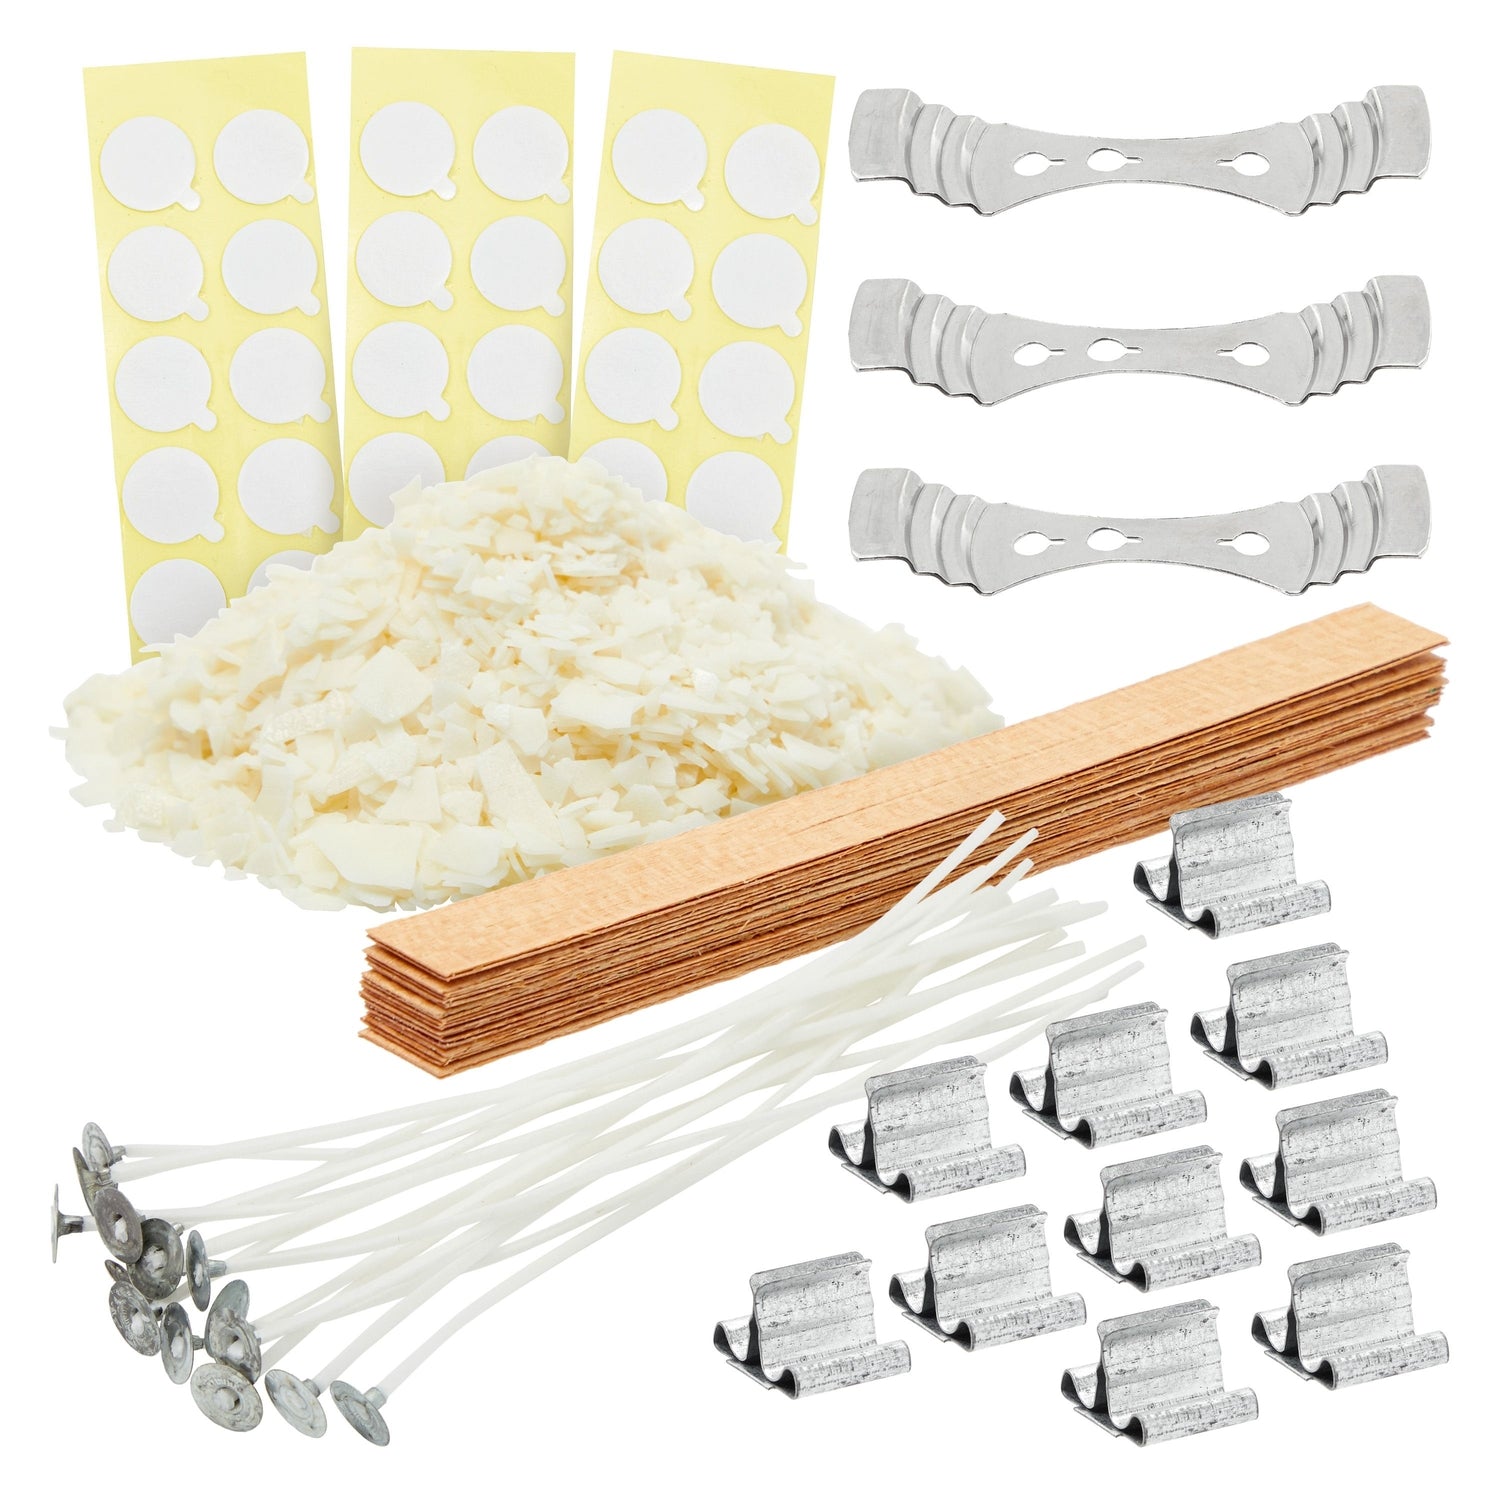 Bright Creations 79 Piece Palm Wax Candle Making Kit with Iron Stands, Wood and Cotton Wicks, Centering Bars, Adhesive Stickers (2.5 lbs)